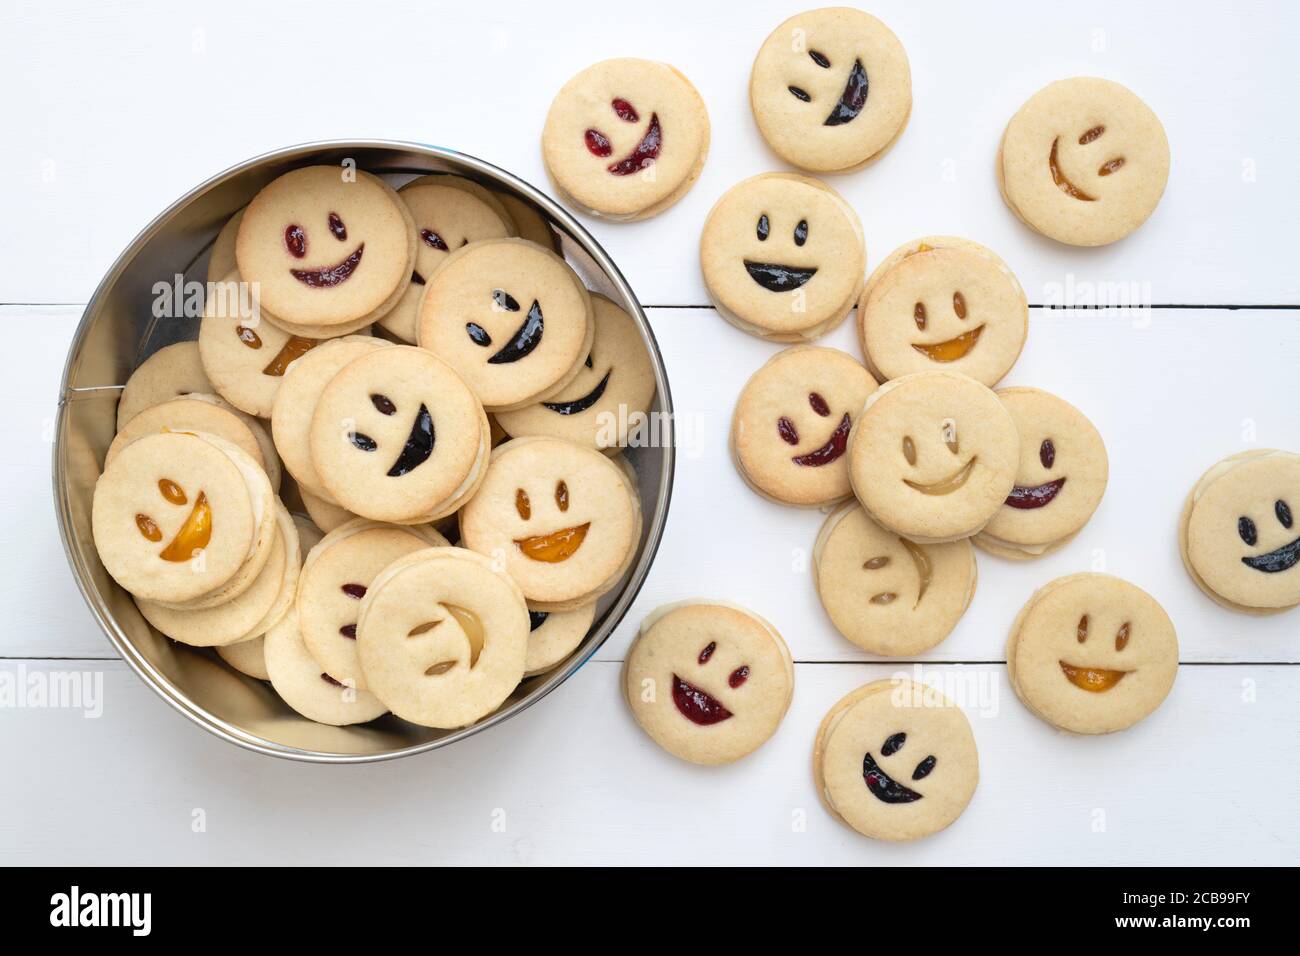 Homemade Jammie Dodgers. Smiling face biscuits Stock Photo   Alamy